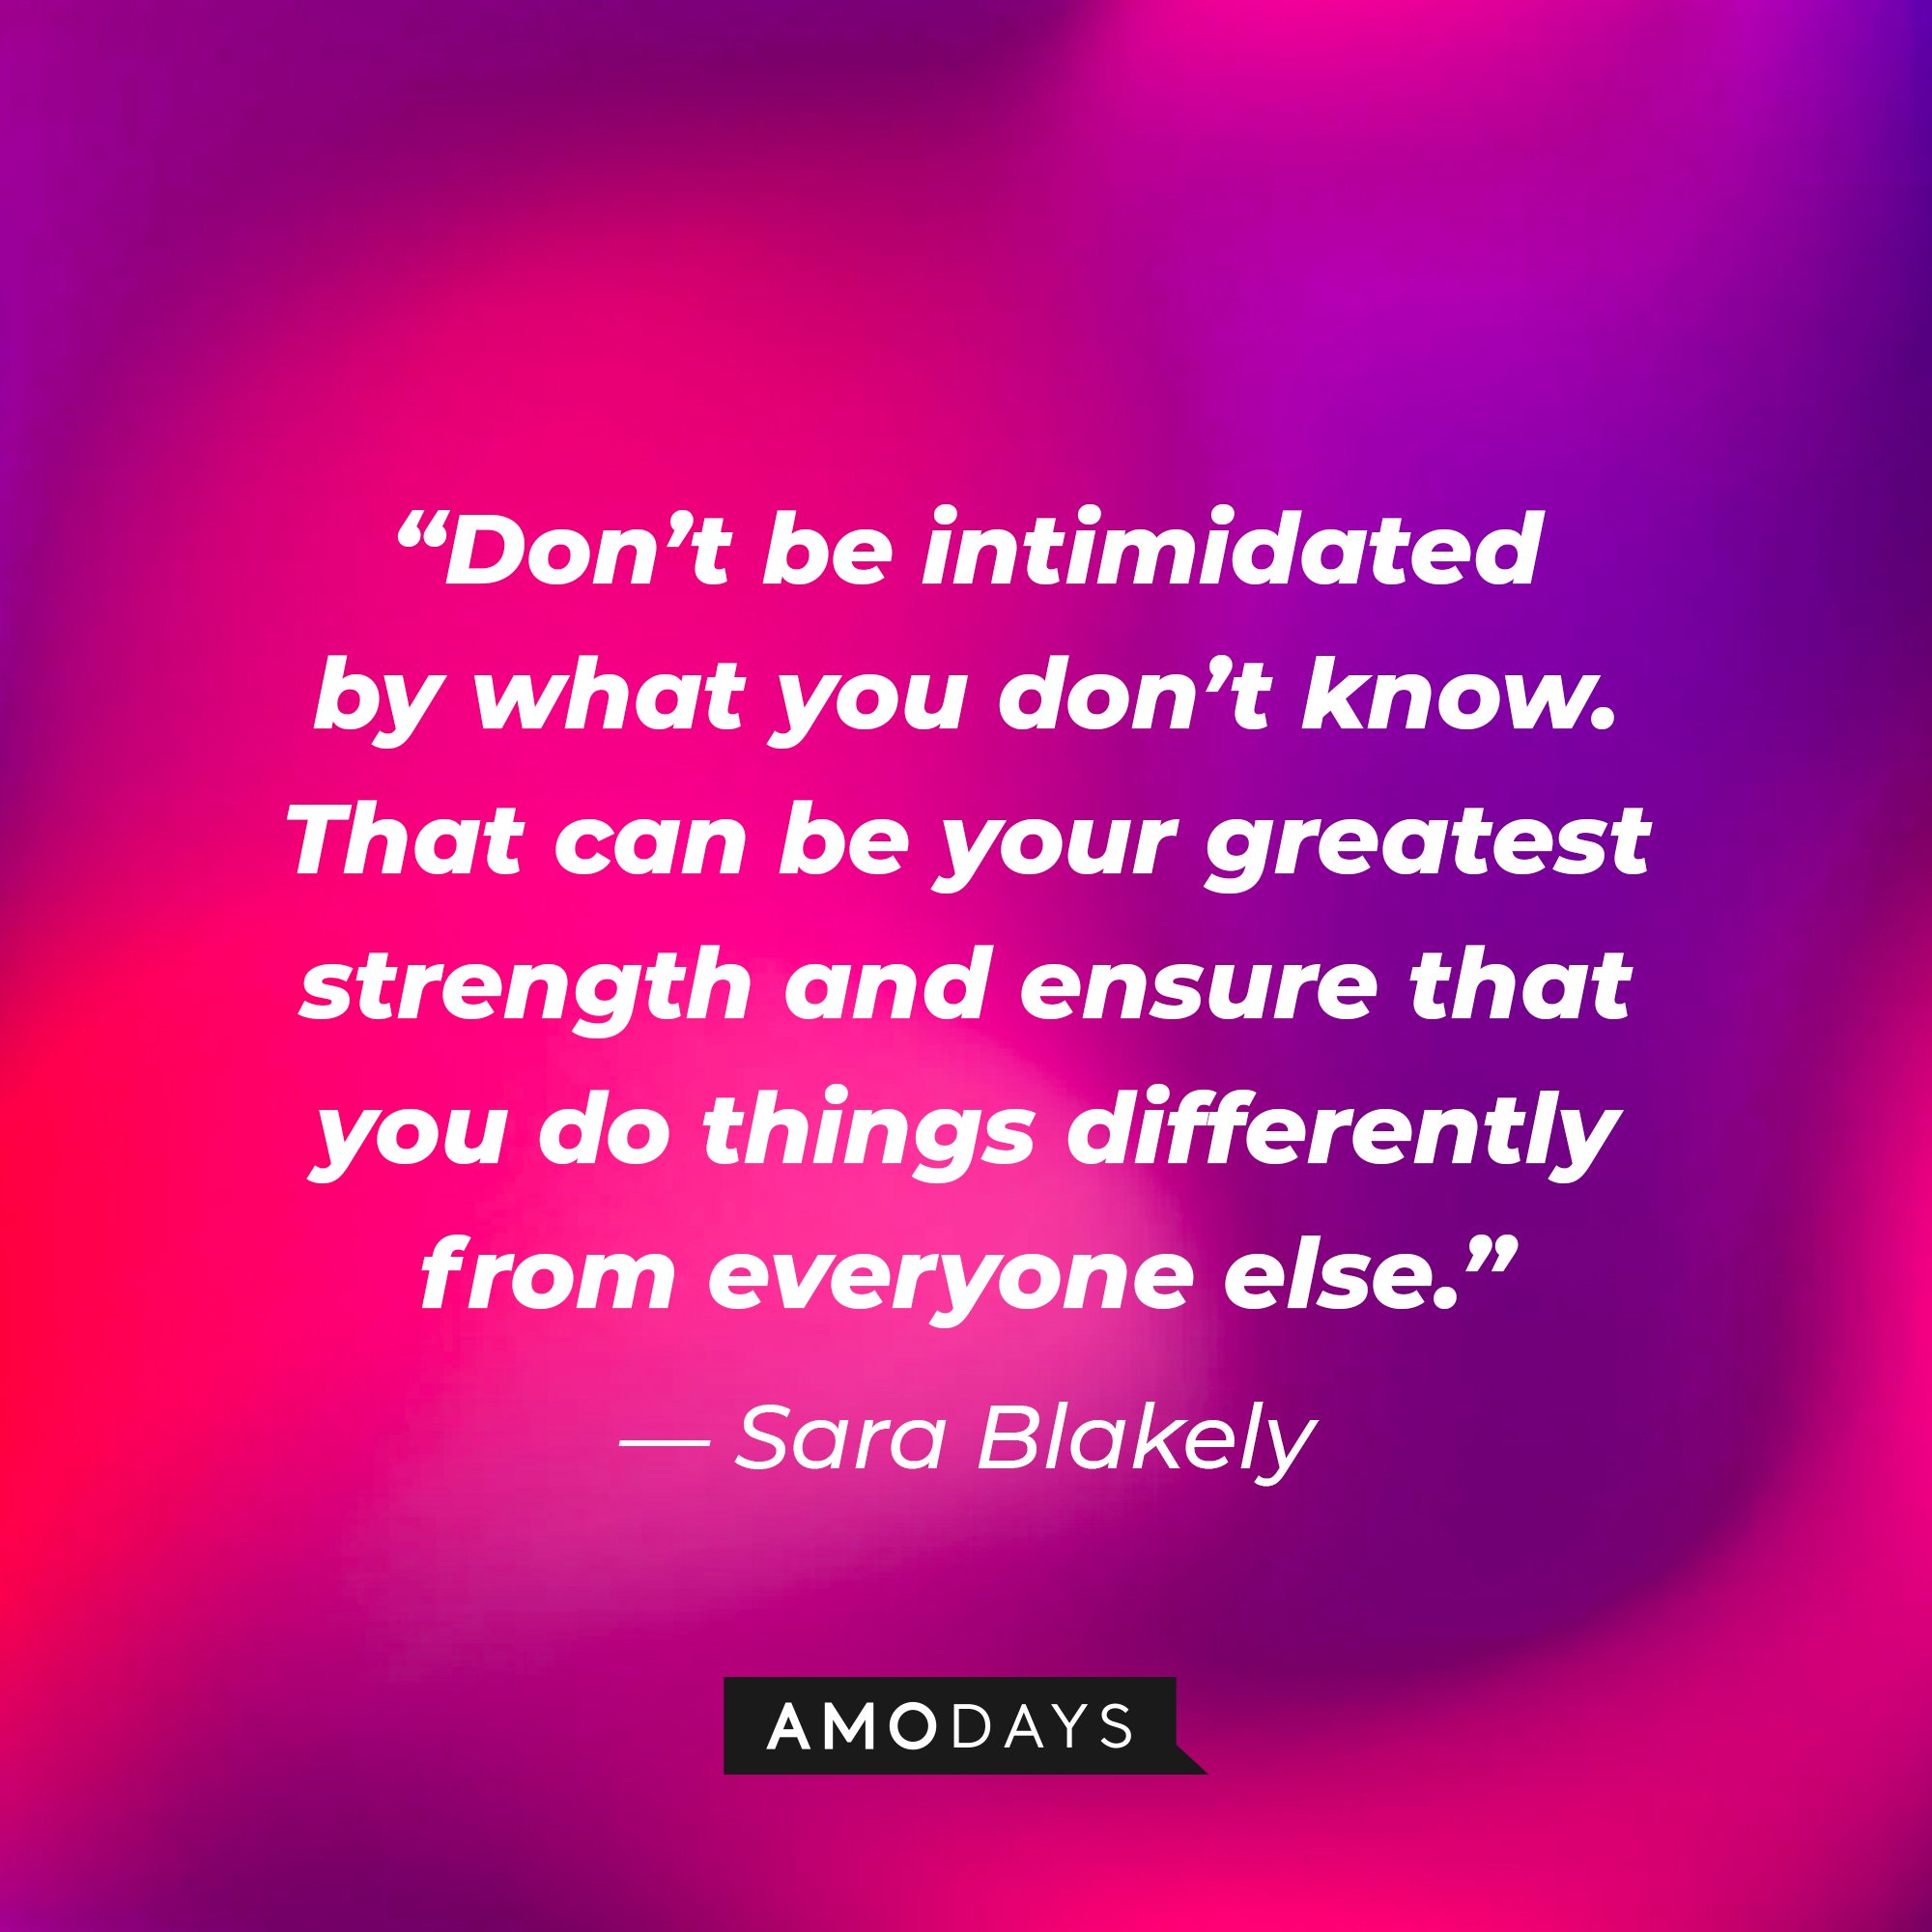 Sara Blakely’s quote: “Don’t be intimidated by what you don’t know. That can be your greatest strength and ensure that you do things differently from everyone else.” | Image: AmoDays